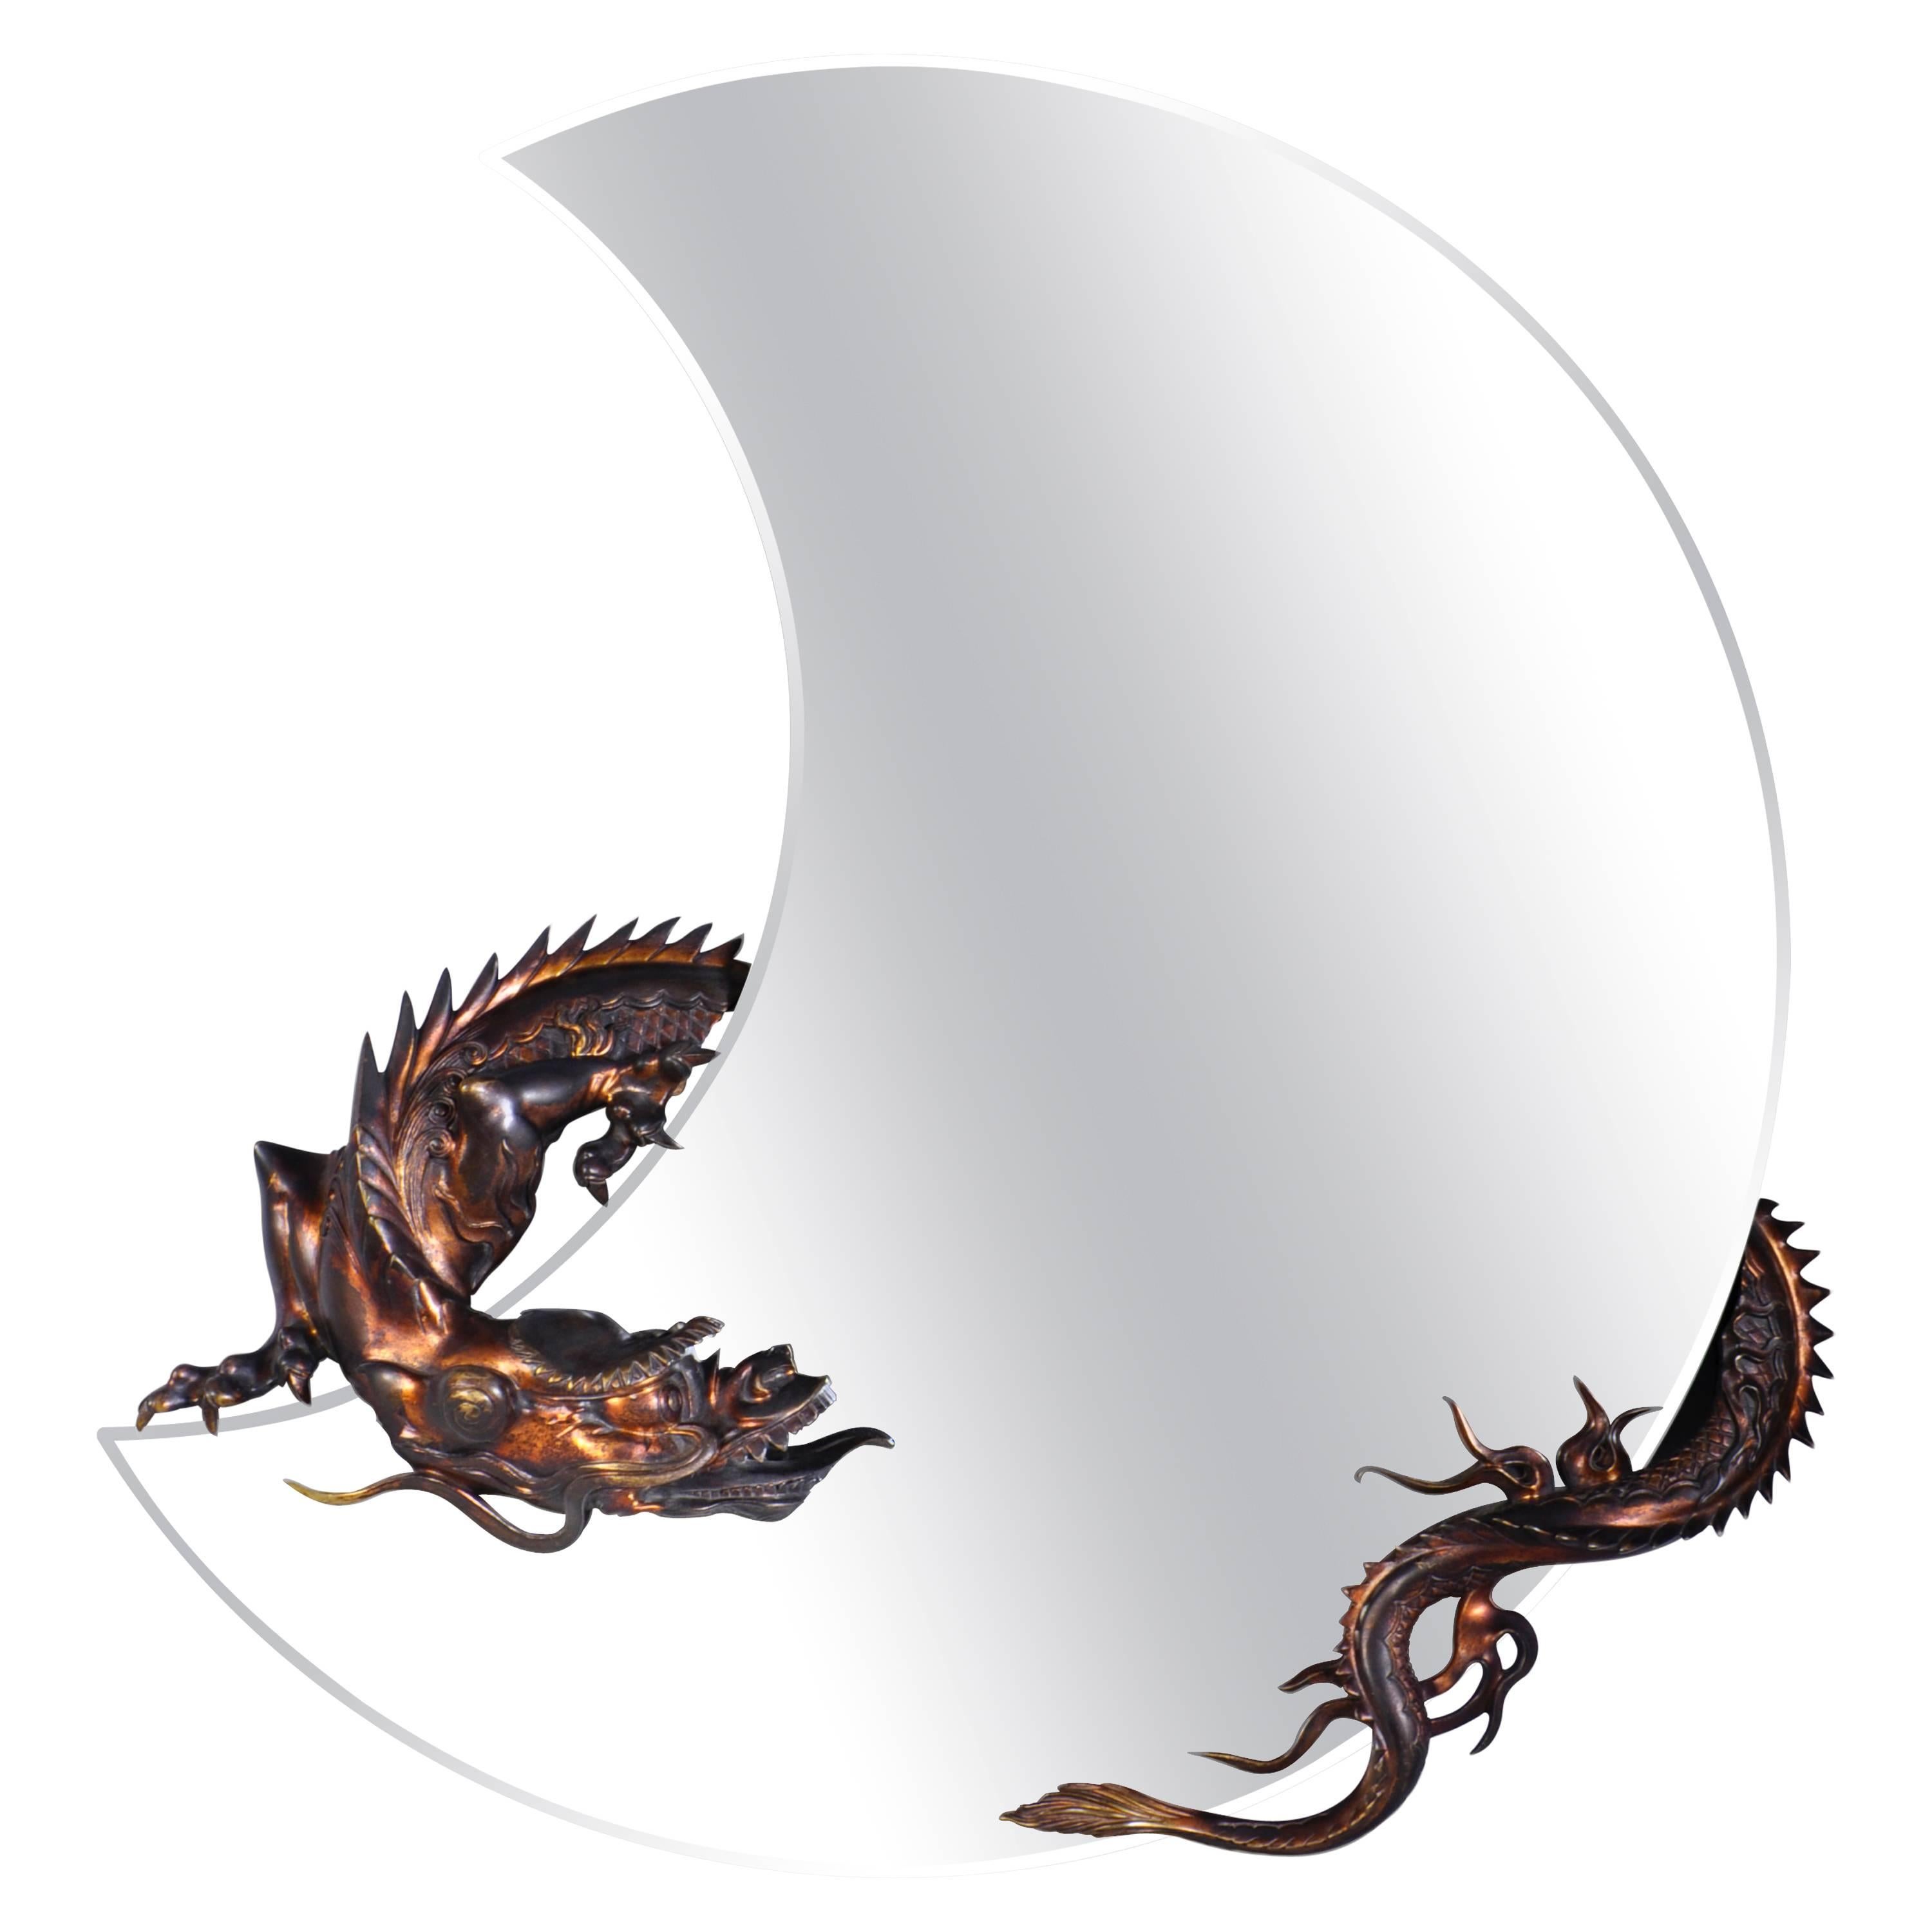 Dragon Mirror Attributed to Perret and Vibert, Maison Des Bambous